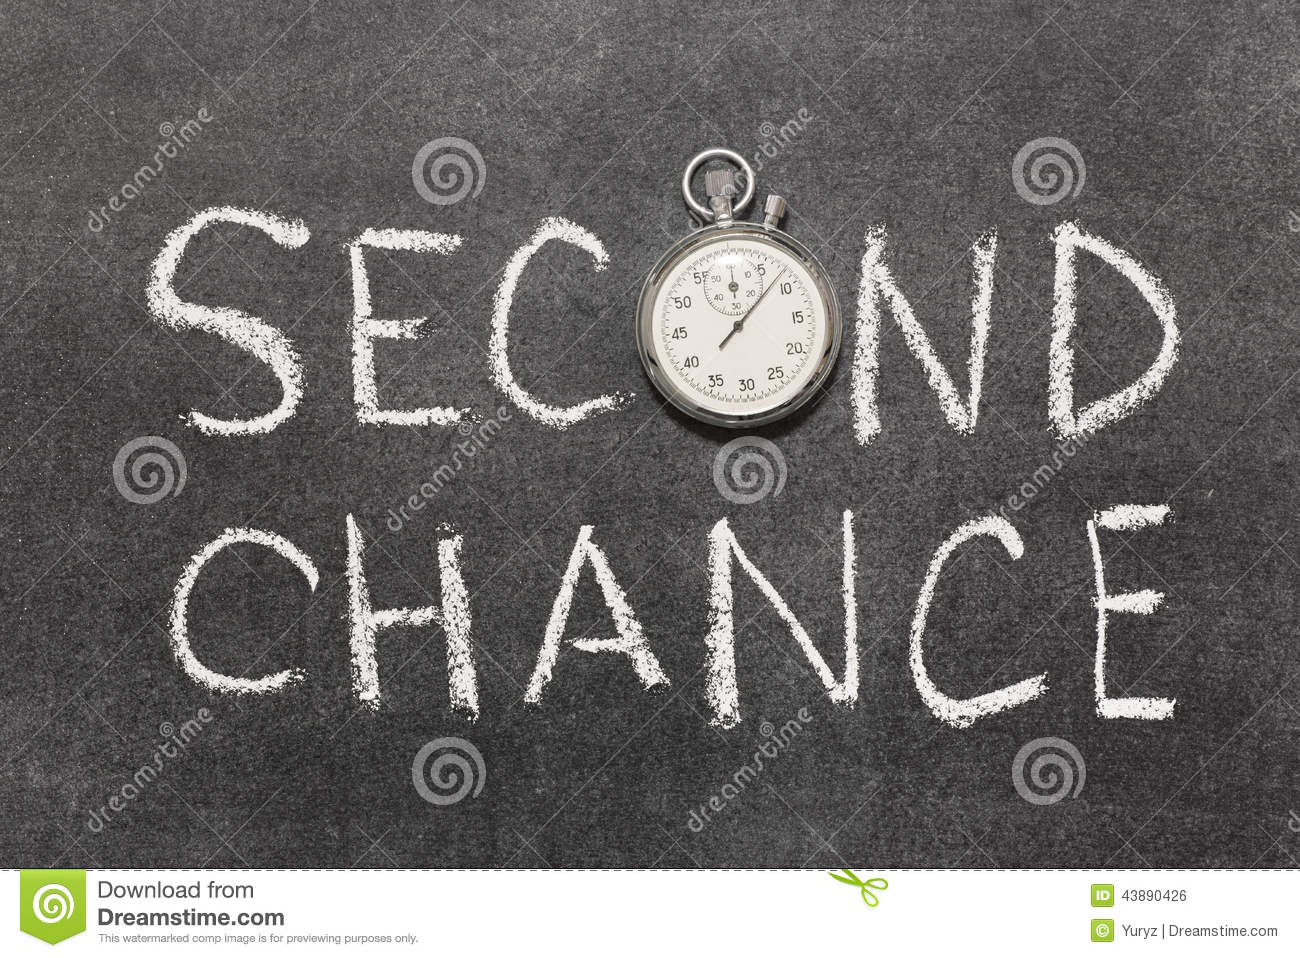 Second Chance Phrase With Vintage Precise Stopwatch Used Instead Of O